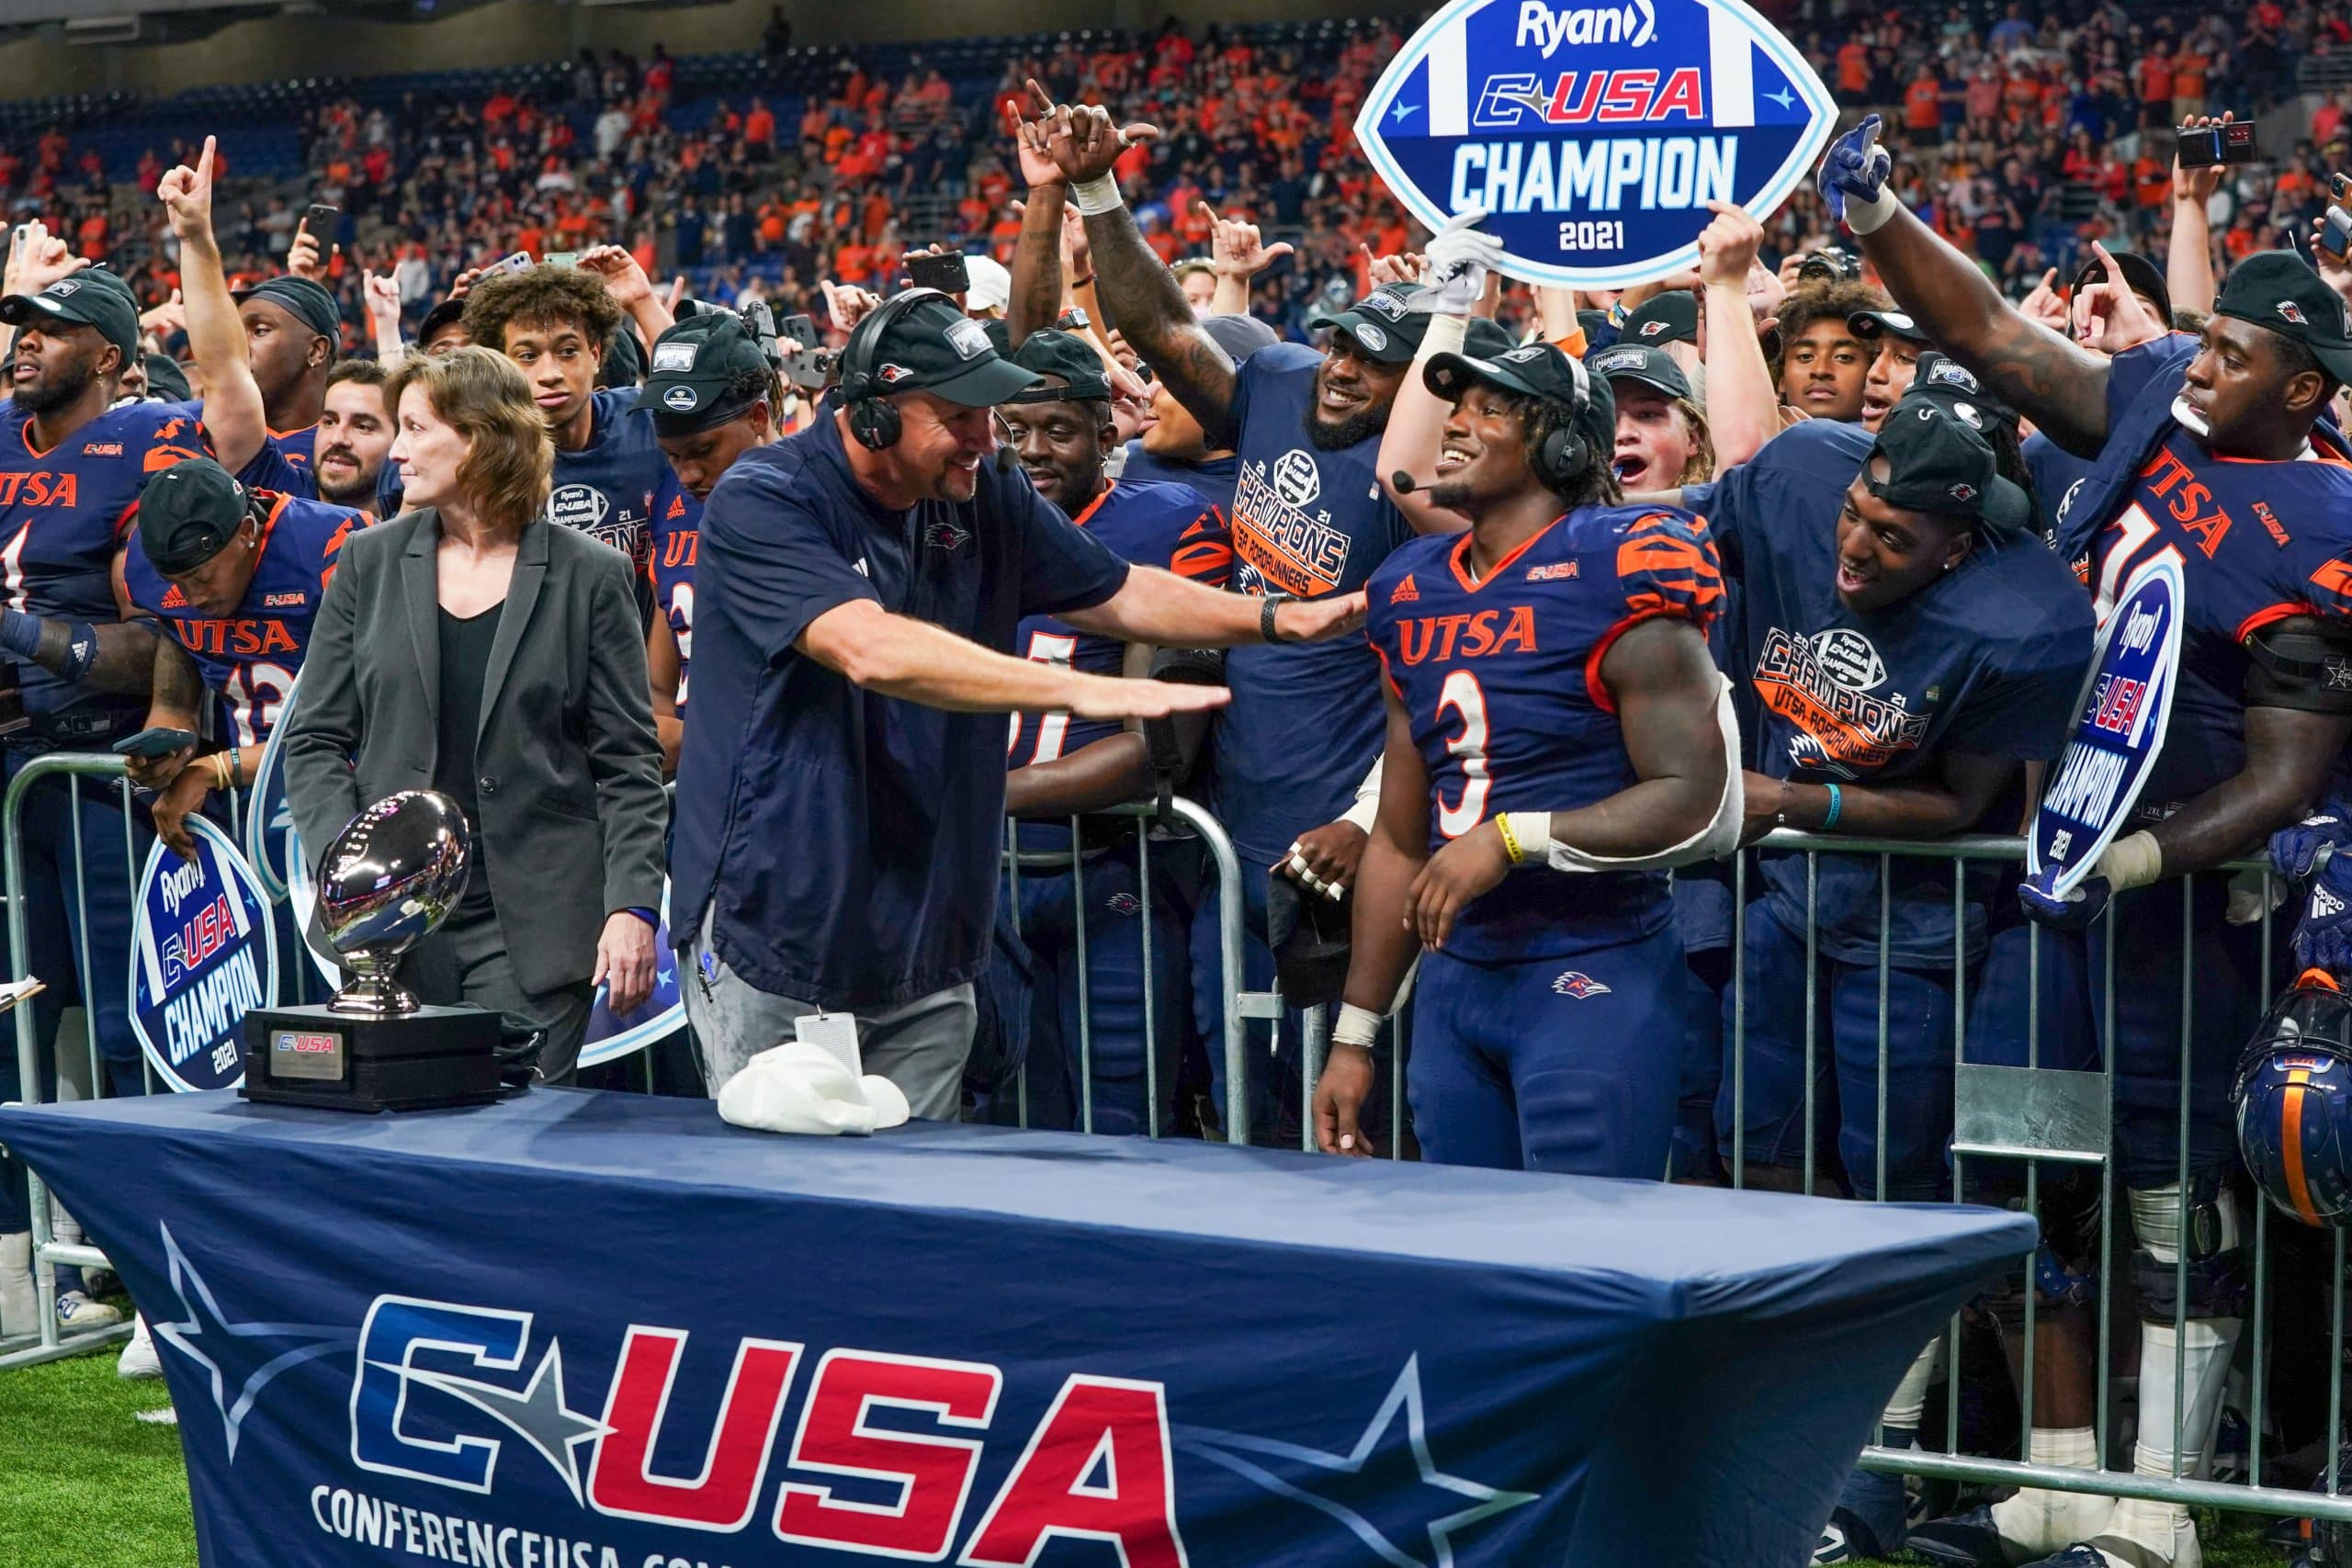 Conference USA Commissioner Seeks to Expand to 12 Teams